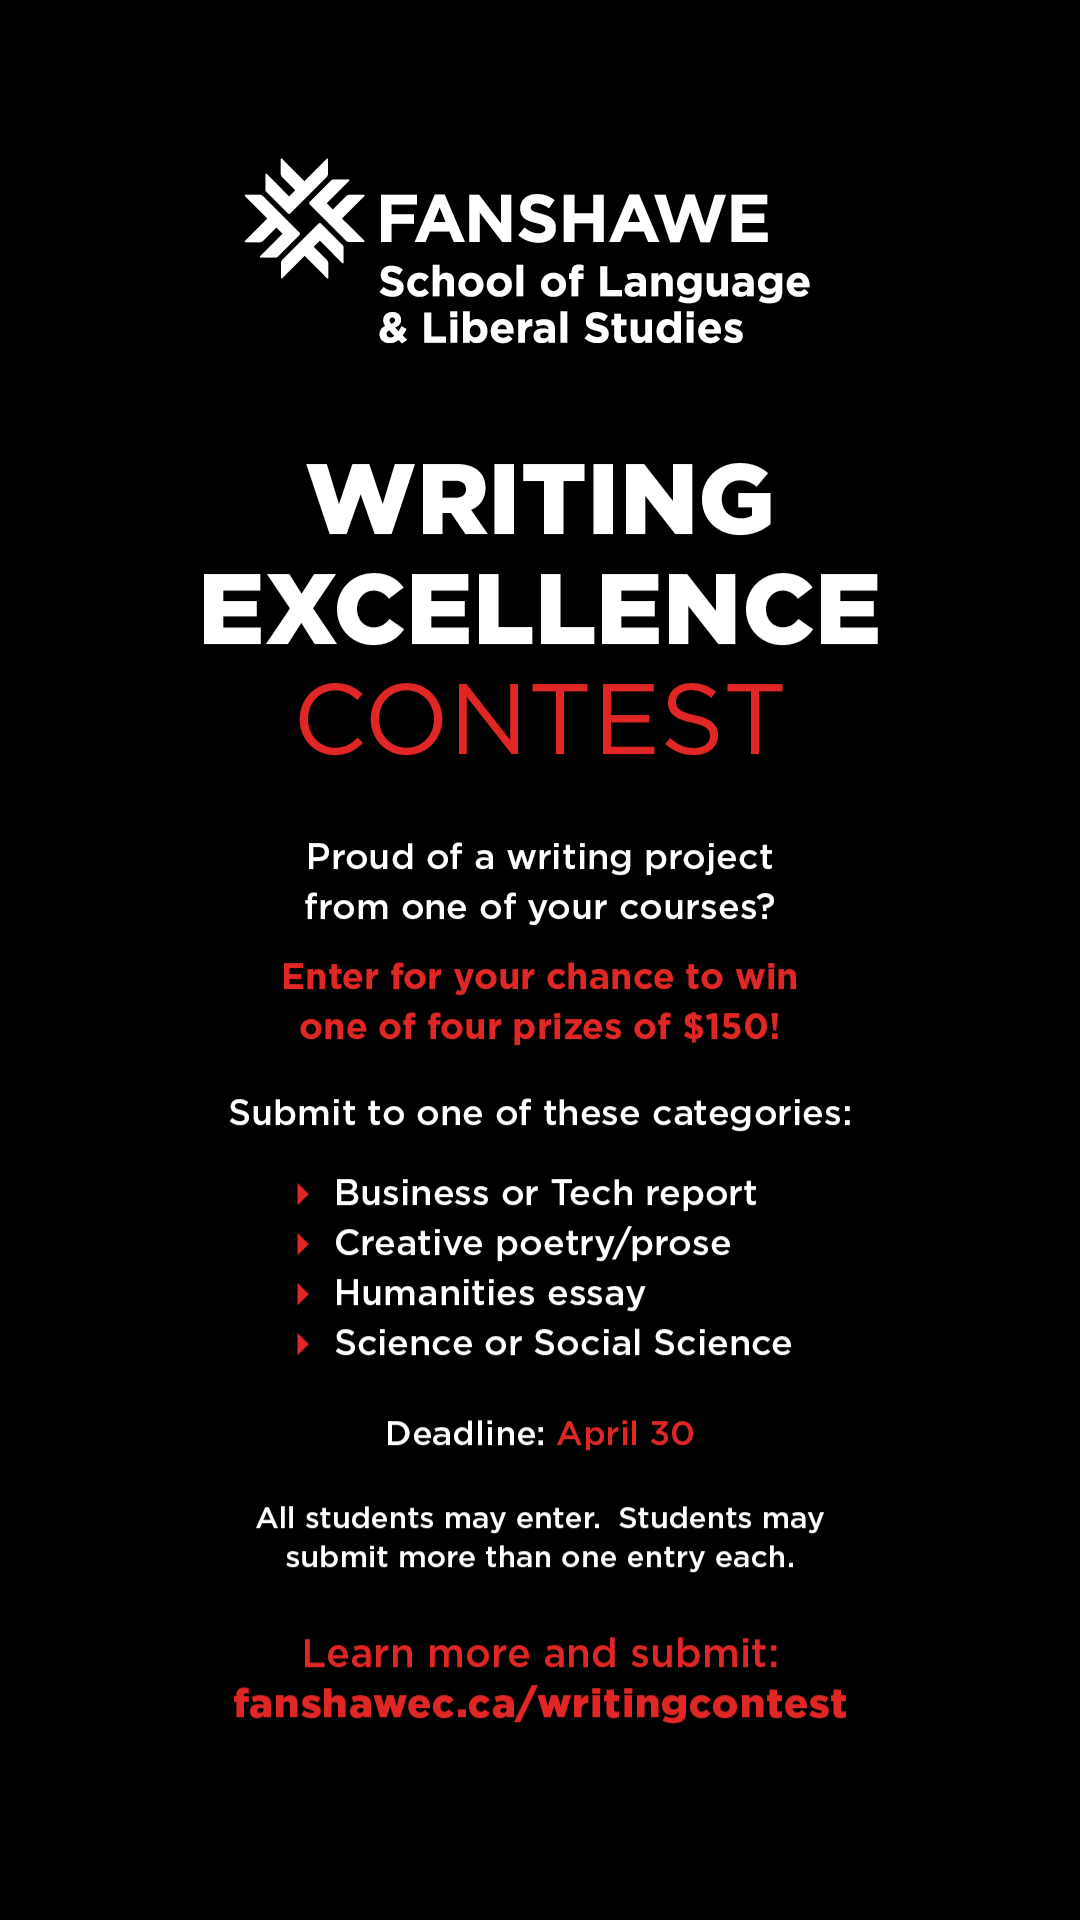 Diversity Writing contest poster details